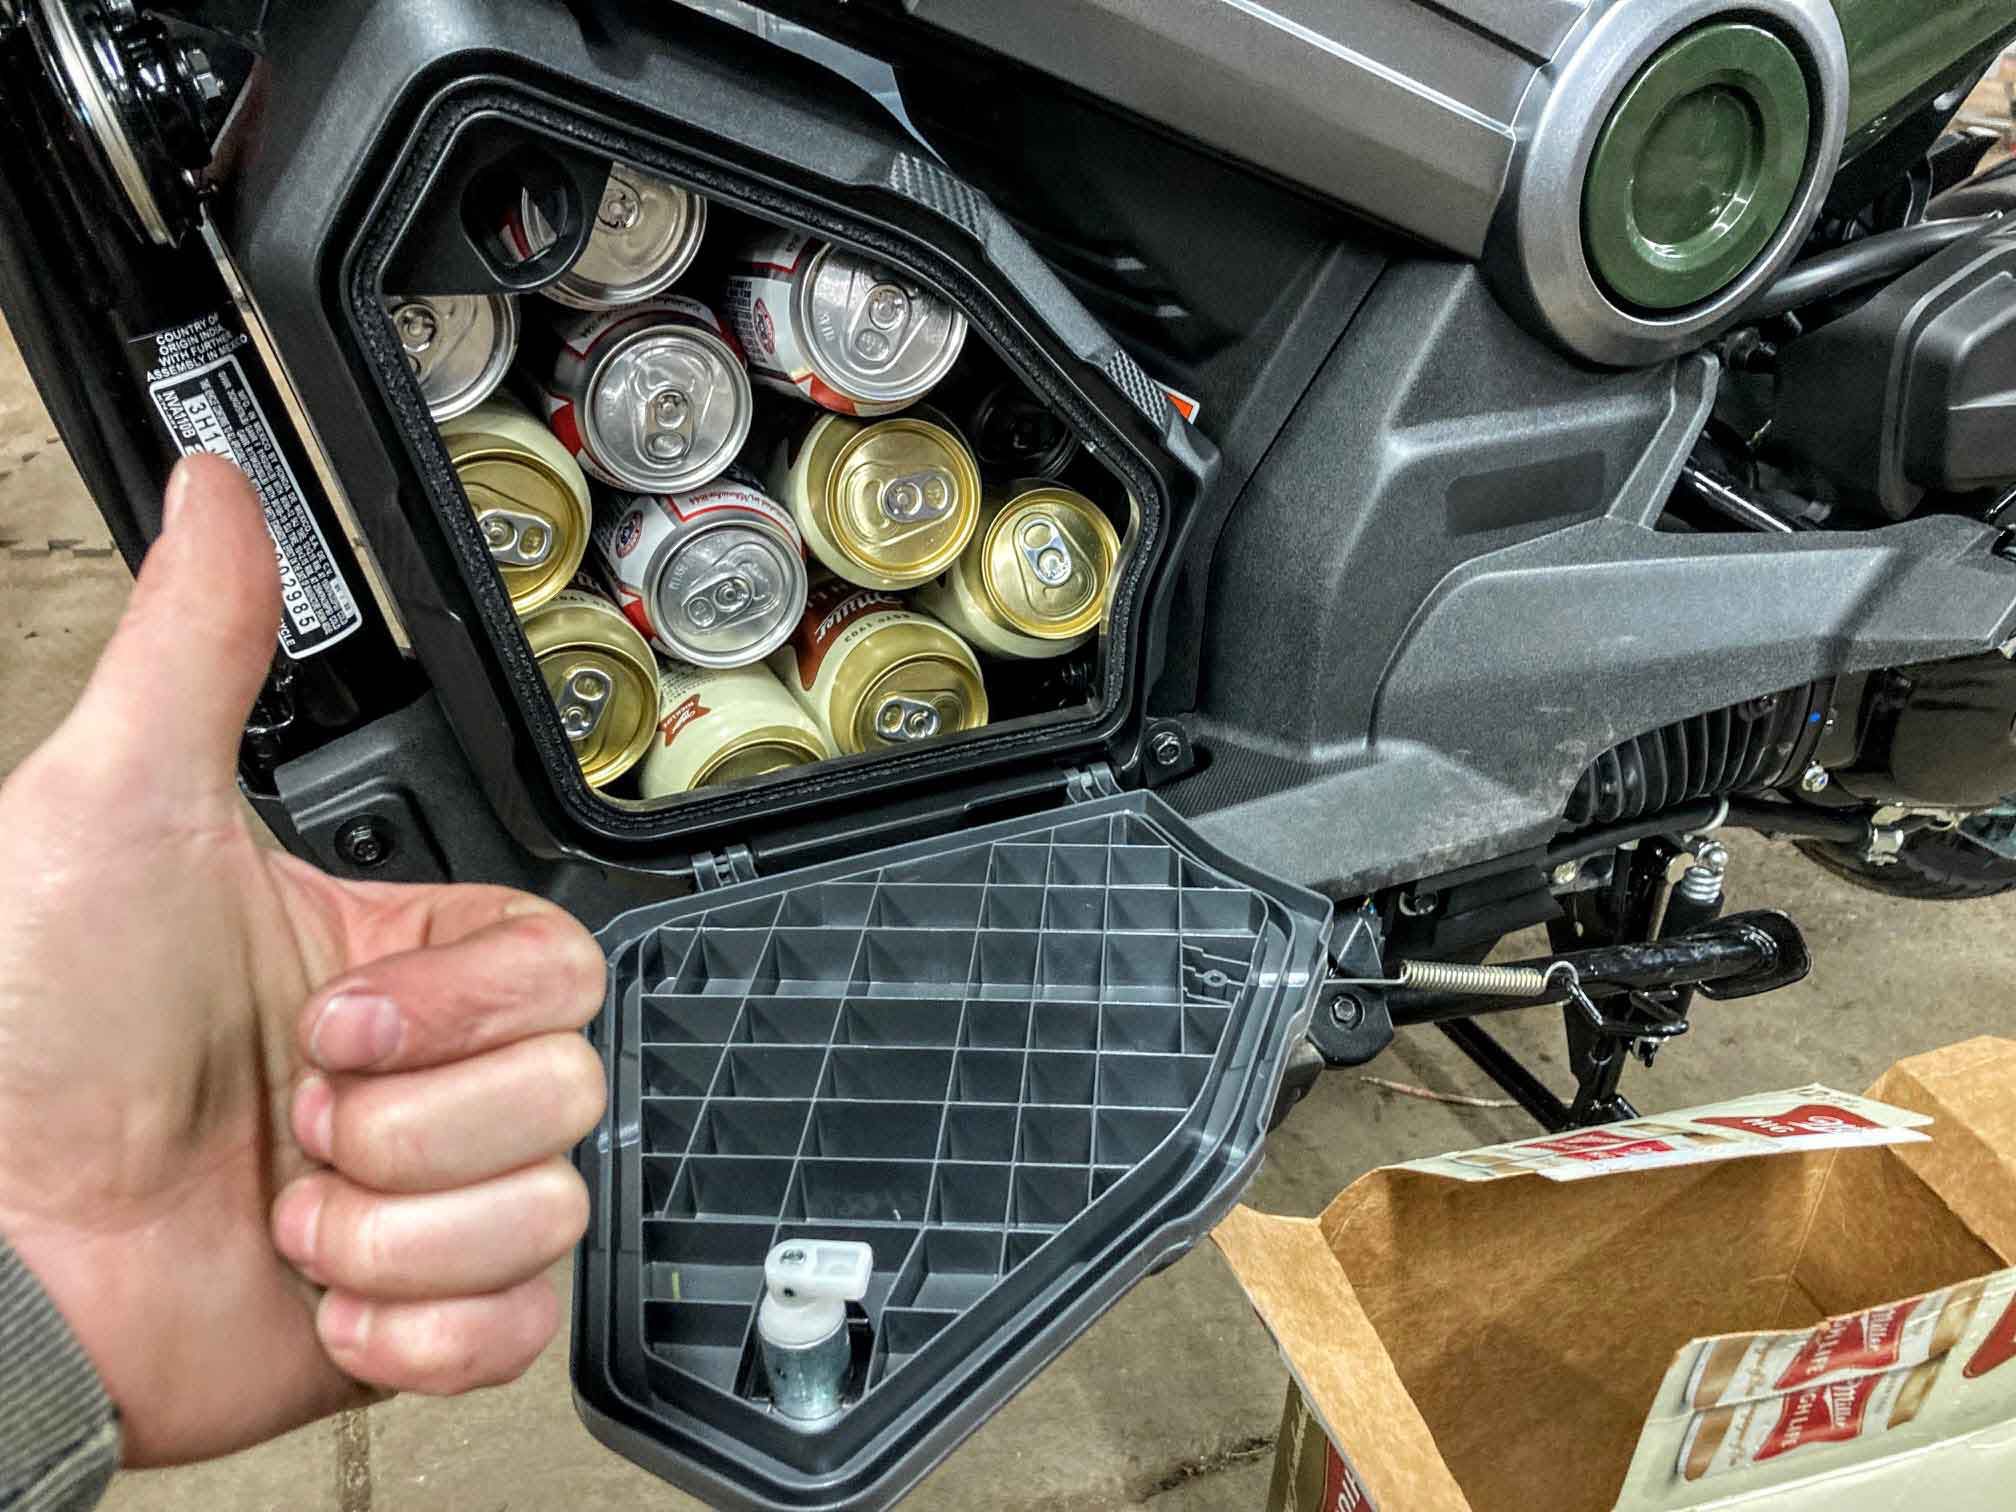 <i>Motorcyclist</i> officially discourages the consumption of alcohol while riding. But 24 beers fit in a Navi.